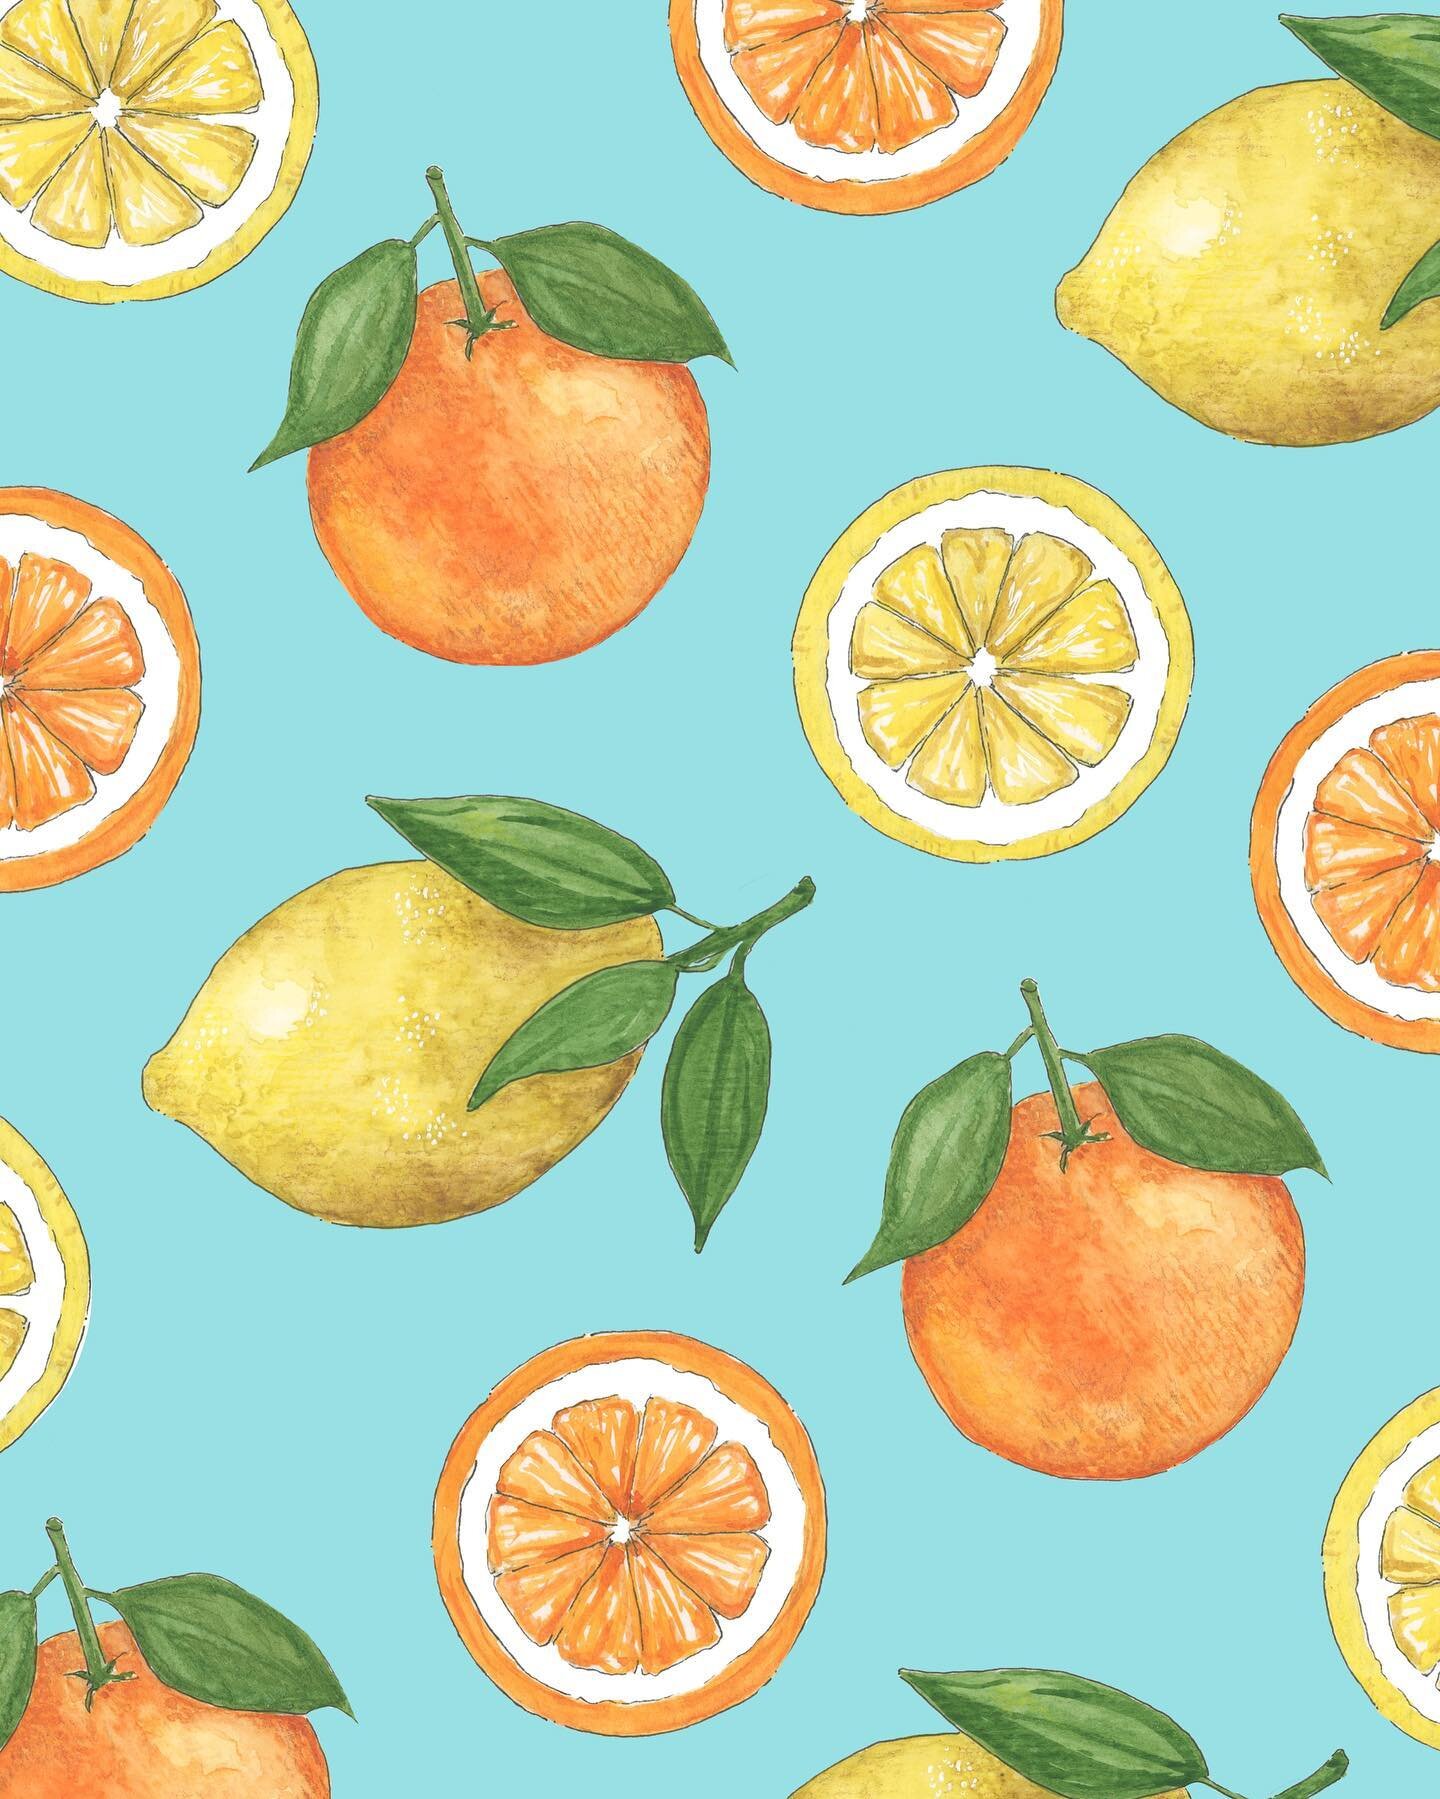 It&rsquo;s been awhile since I created a pattern and I love this one! Some might remember these from my stories a few weeks ago. This pattern definitely makes me think about spring/summer and warmer weather. 🍋 🍊 
.
.
.
.
.
#citrusfruit #paintedfrui